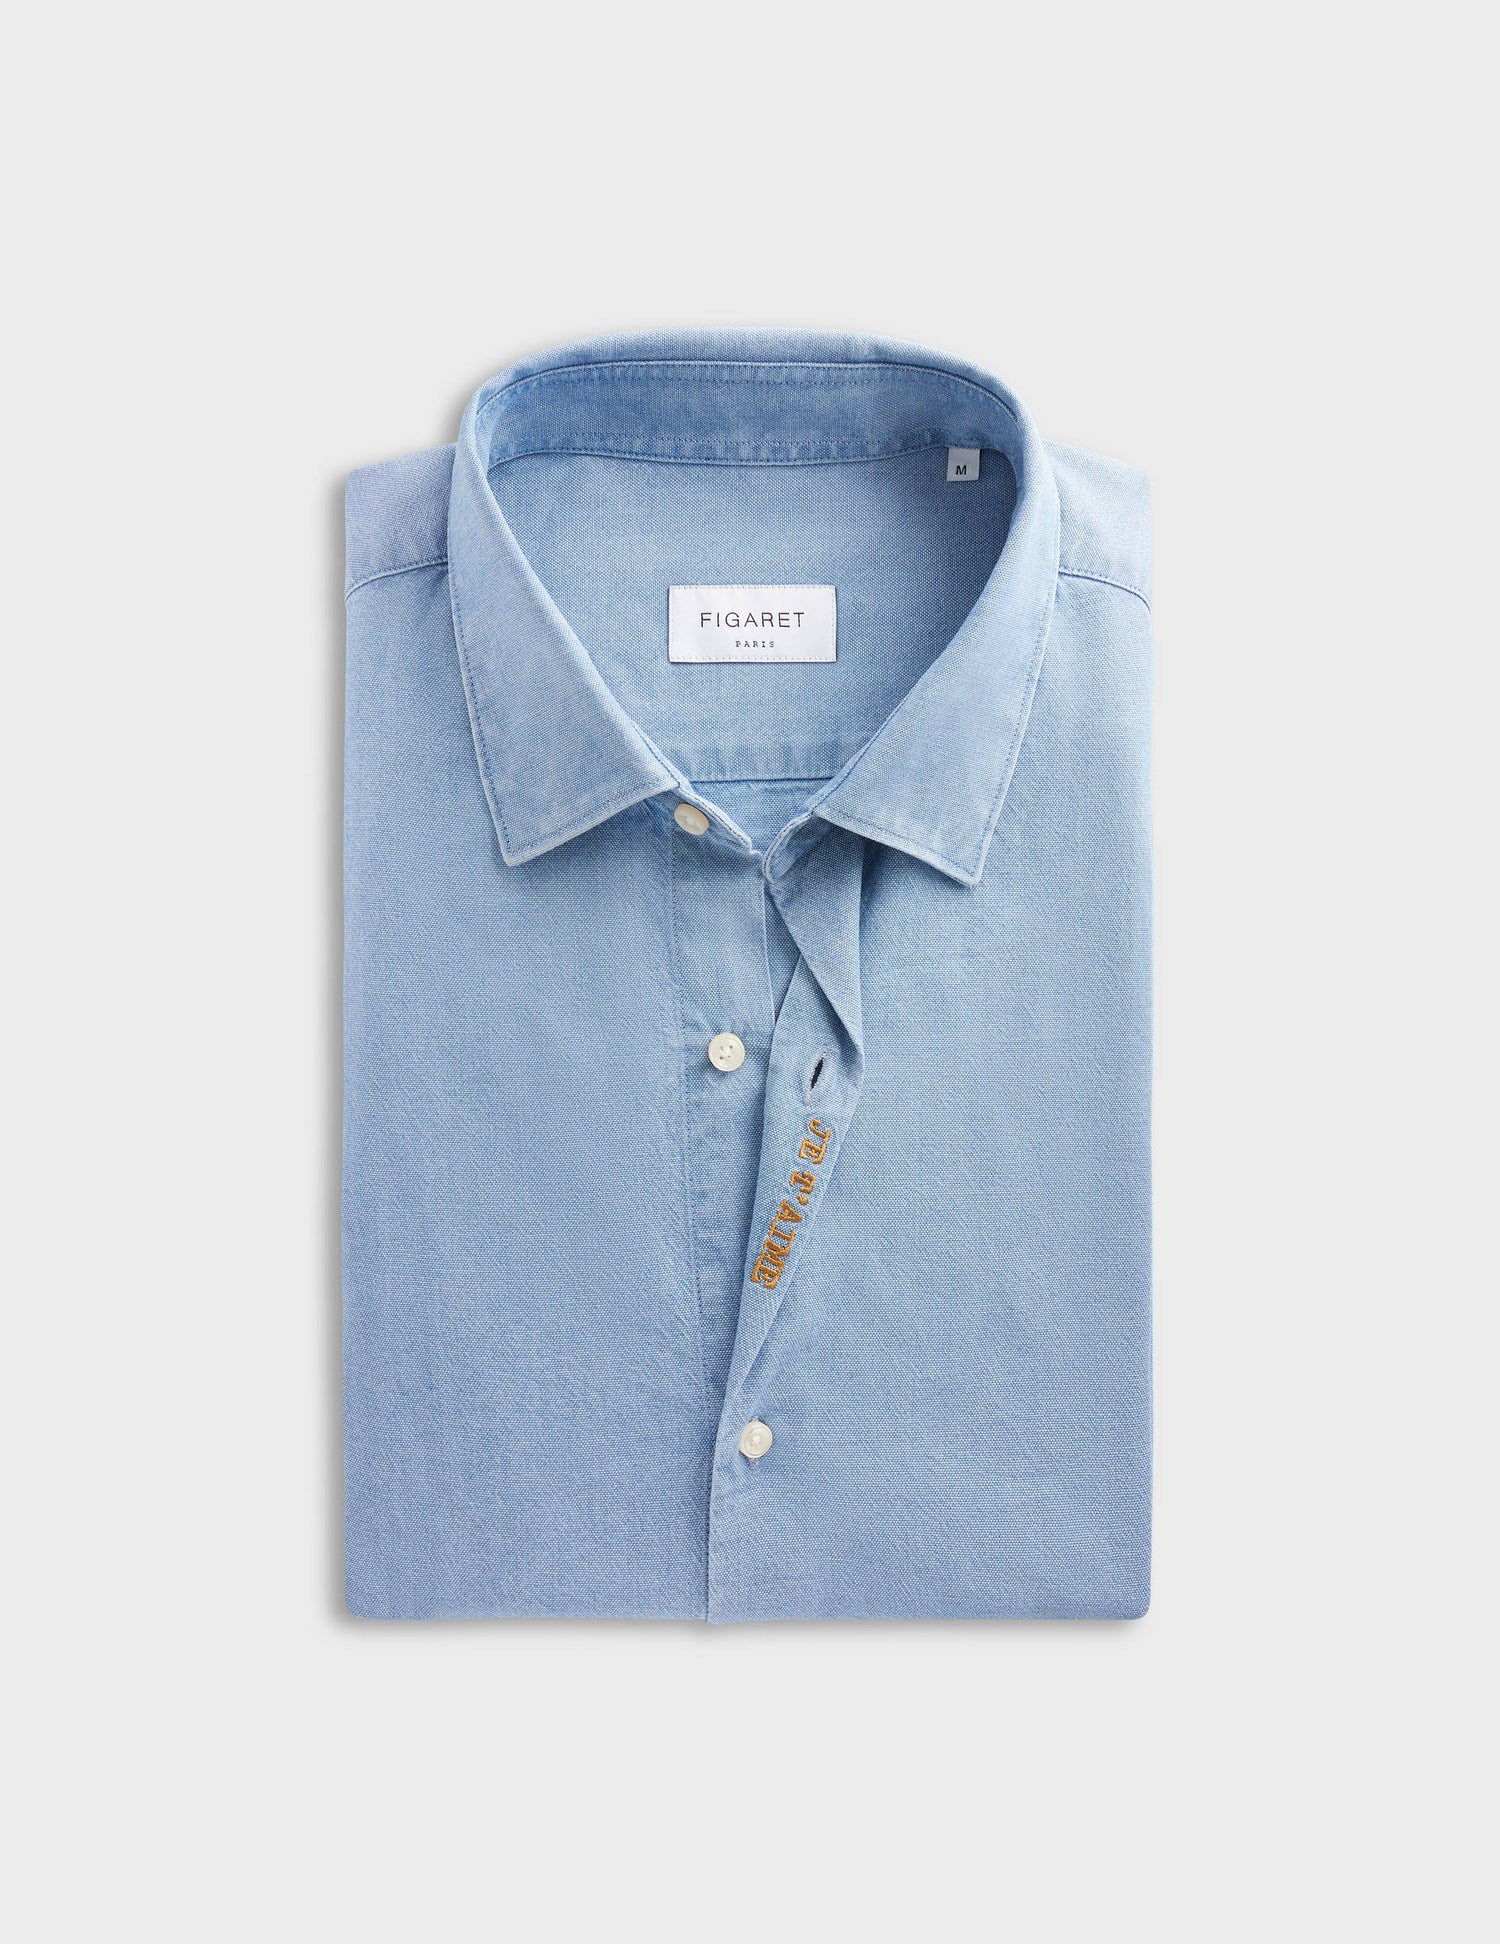 Chemise mixte "Je t'aime" bleu clair - Chambray - Col Figaret#7